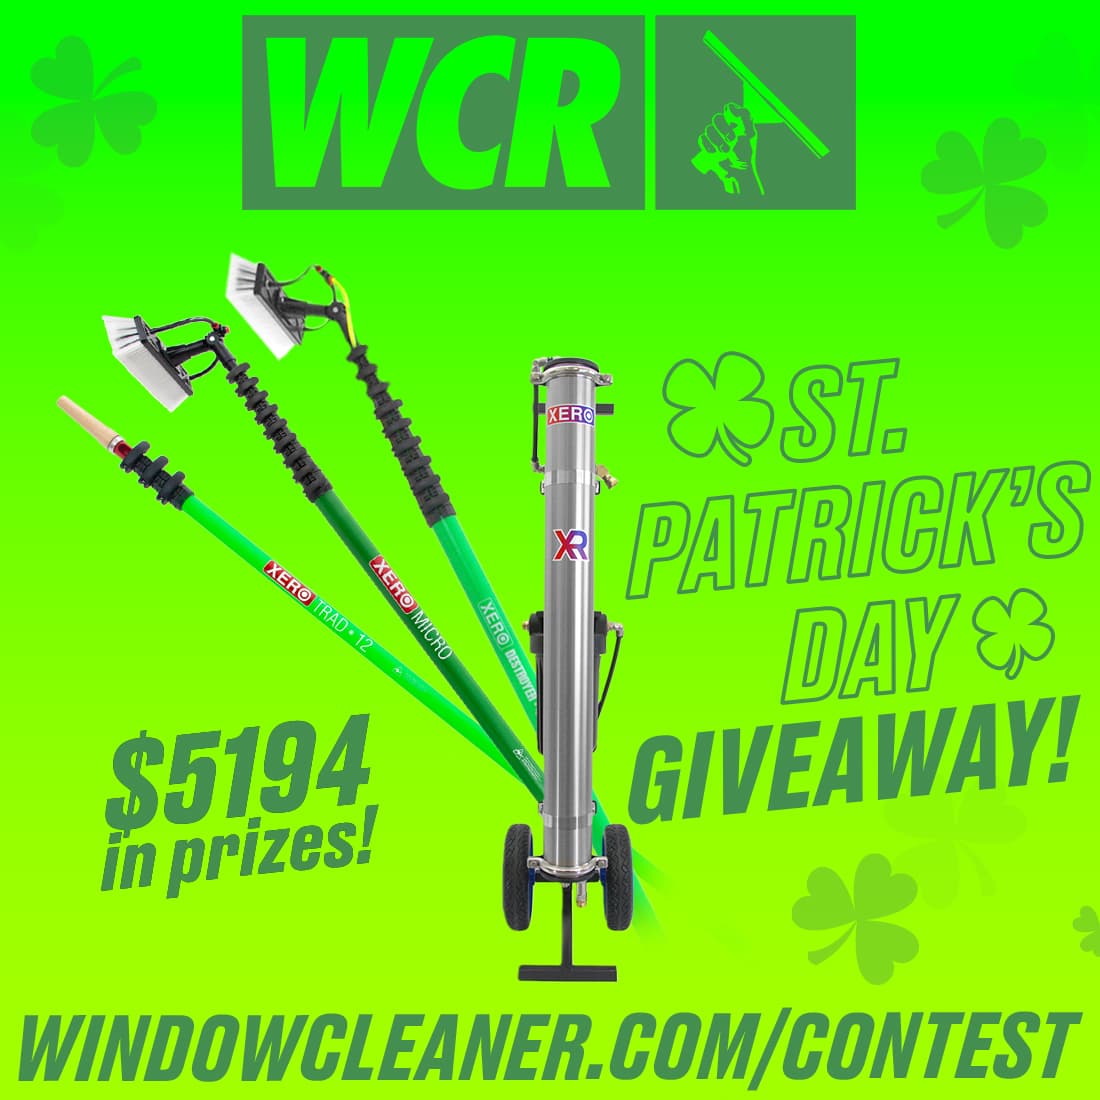 Facebook-Shareable-Patricks-Day-Giveaway-5